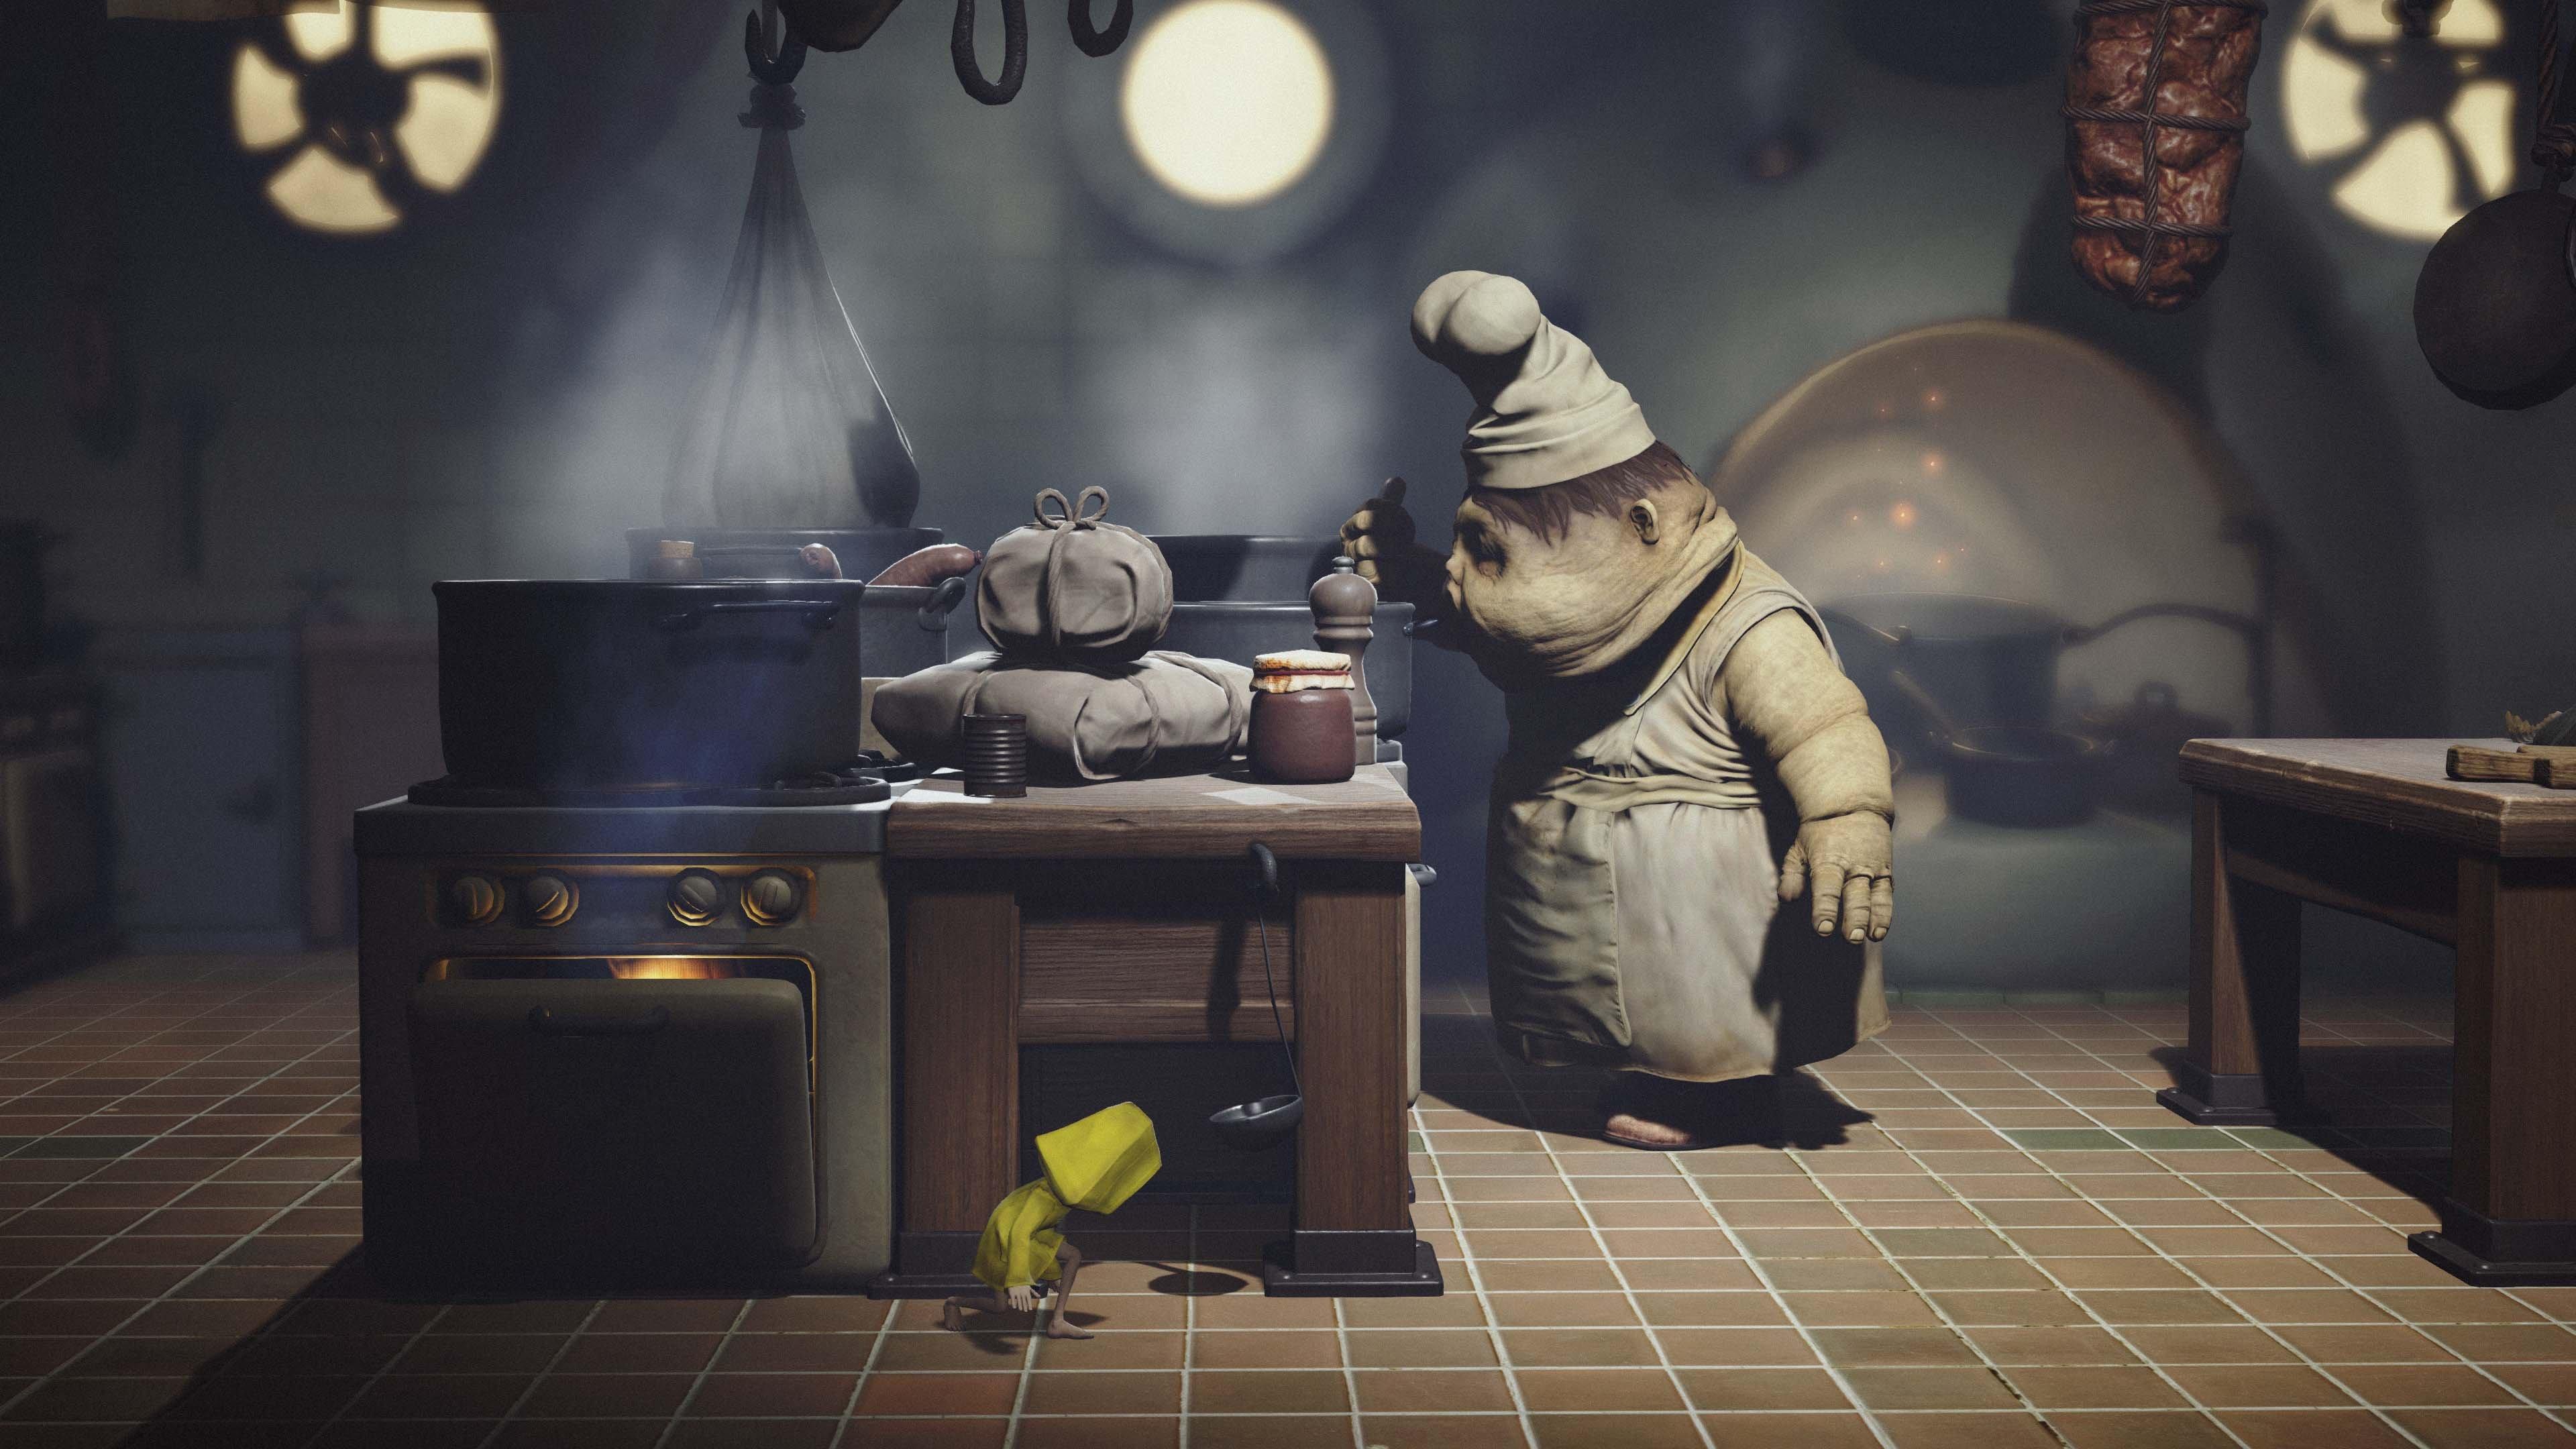 Very Little Nightmares (Video Game) - TV Tropes